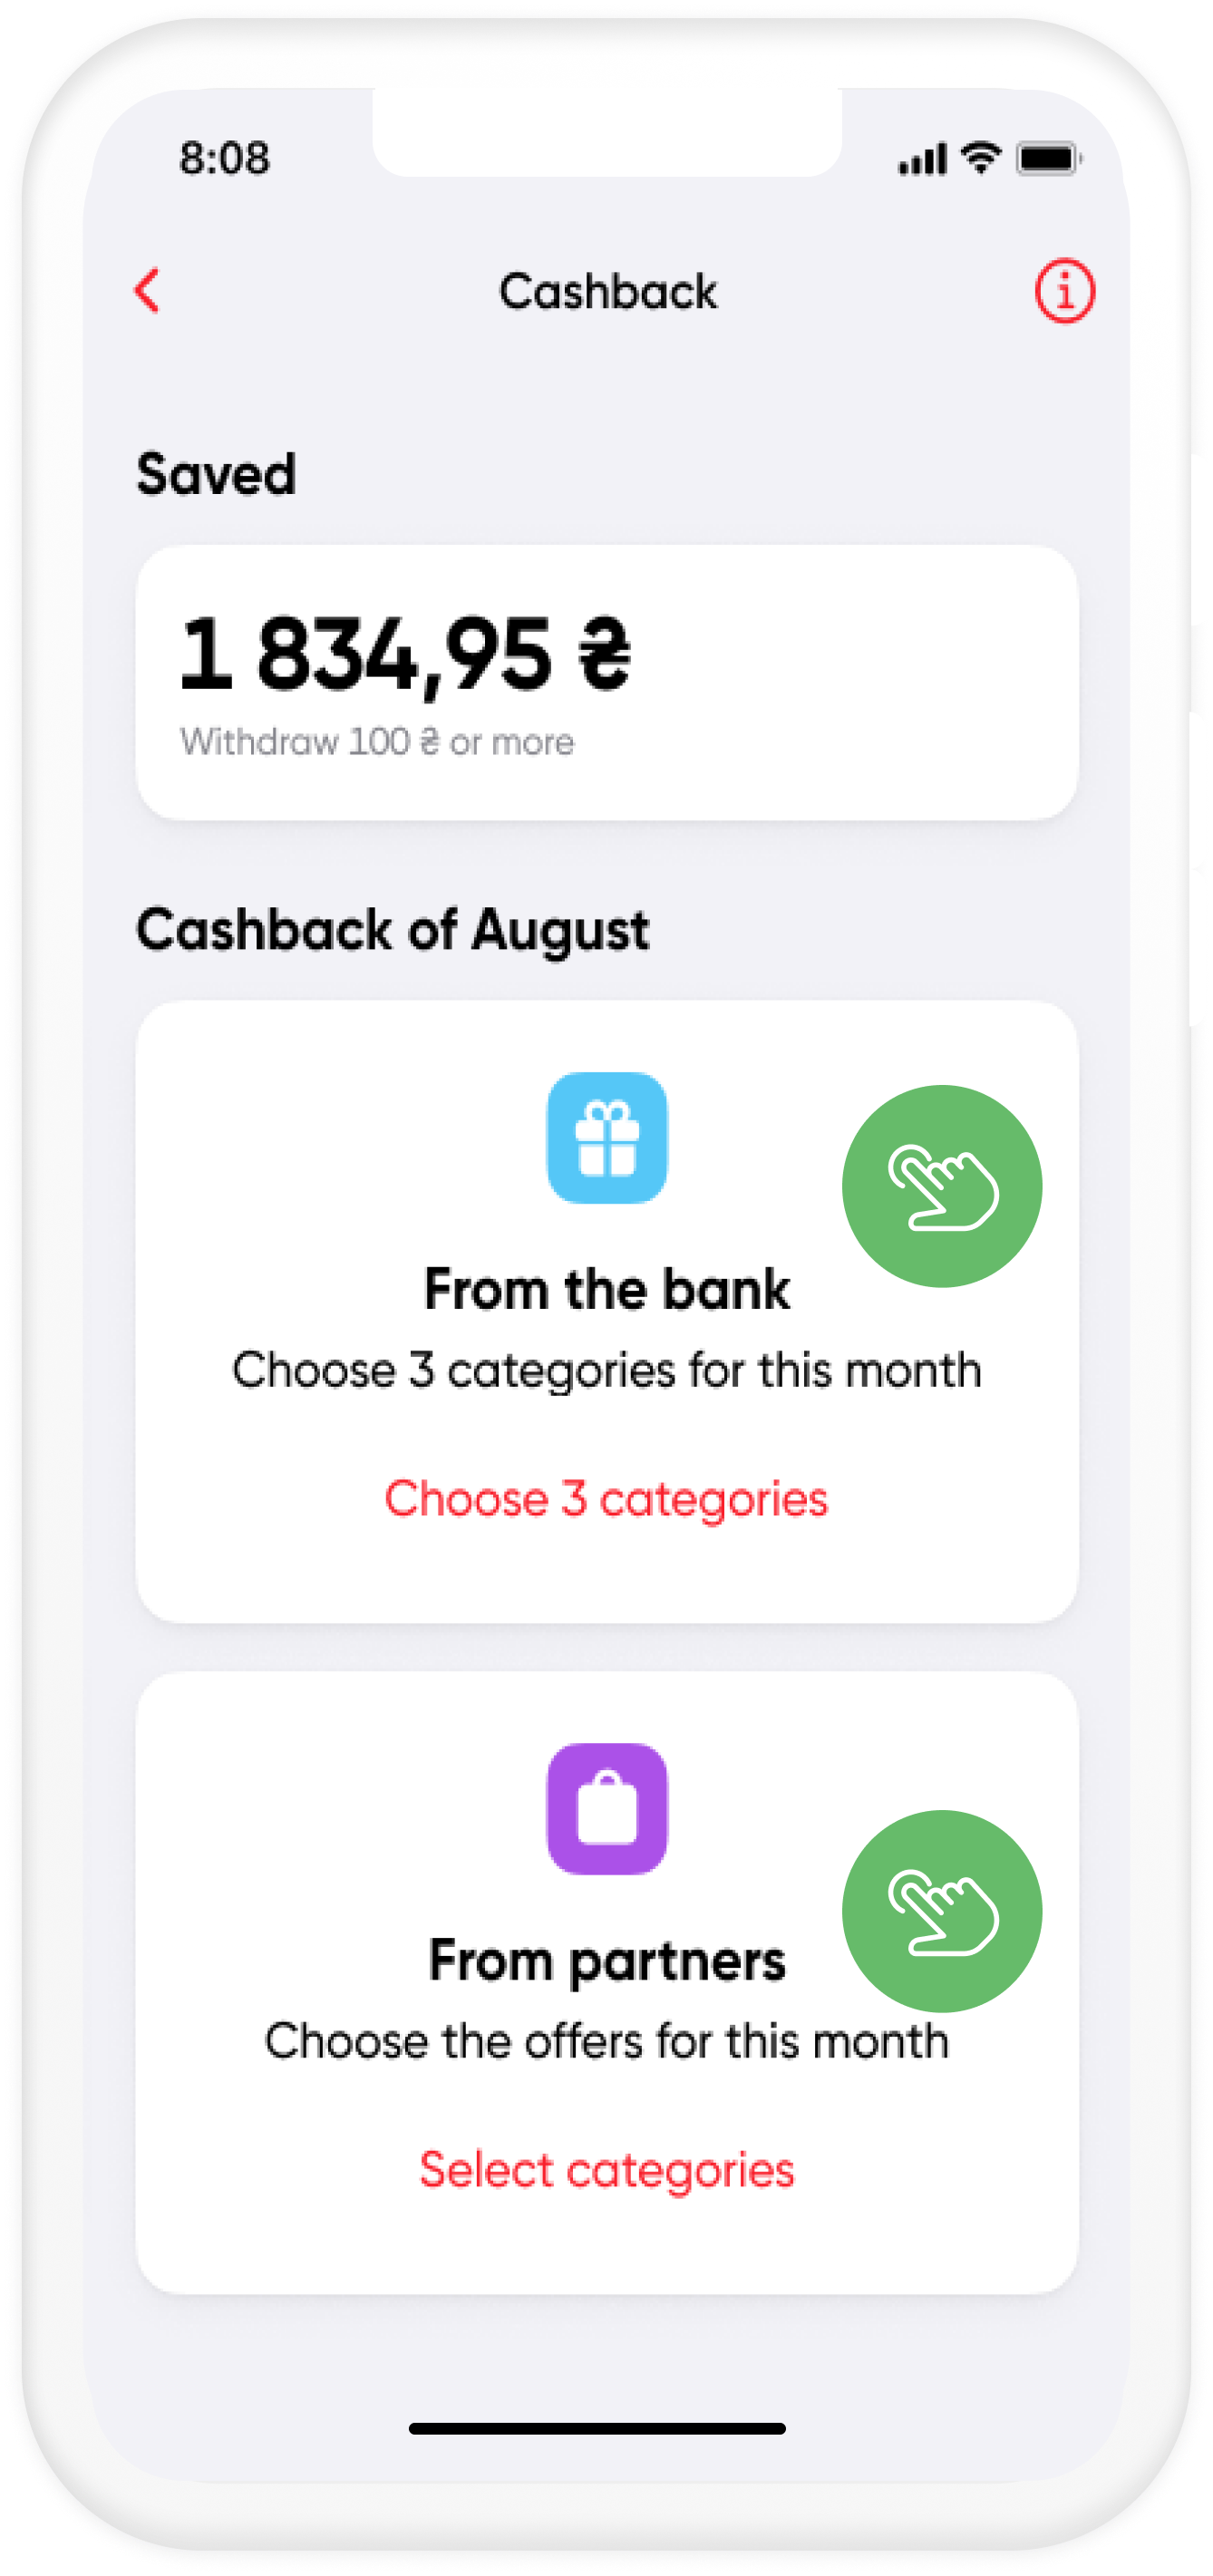 Choose 3 (three) categories of cashback from the Bank and any number of offers from Partners